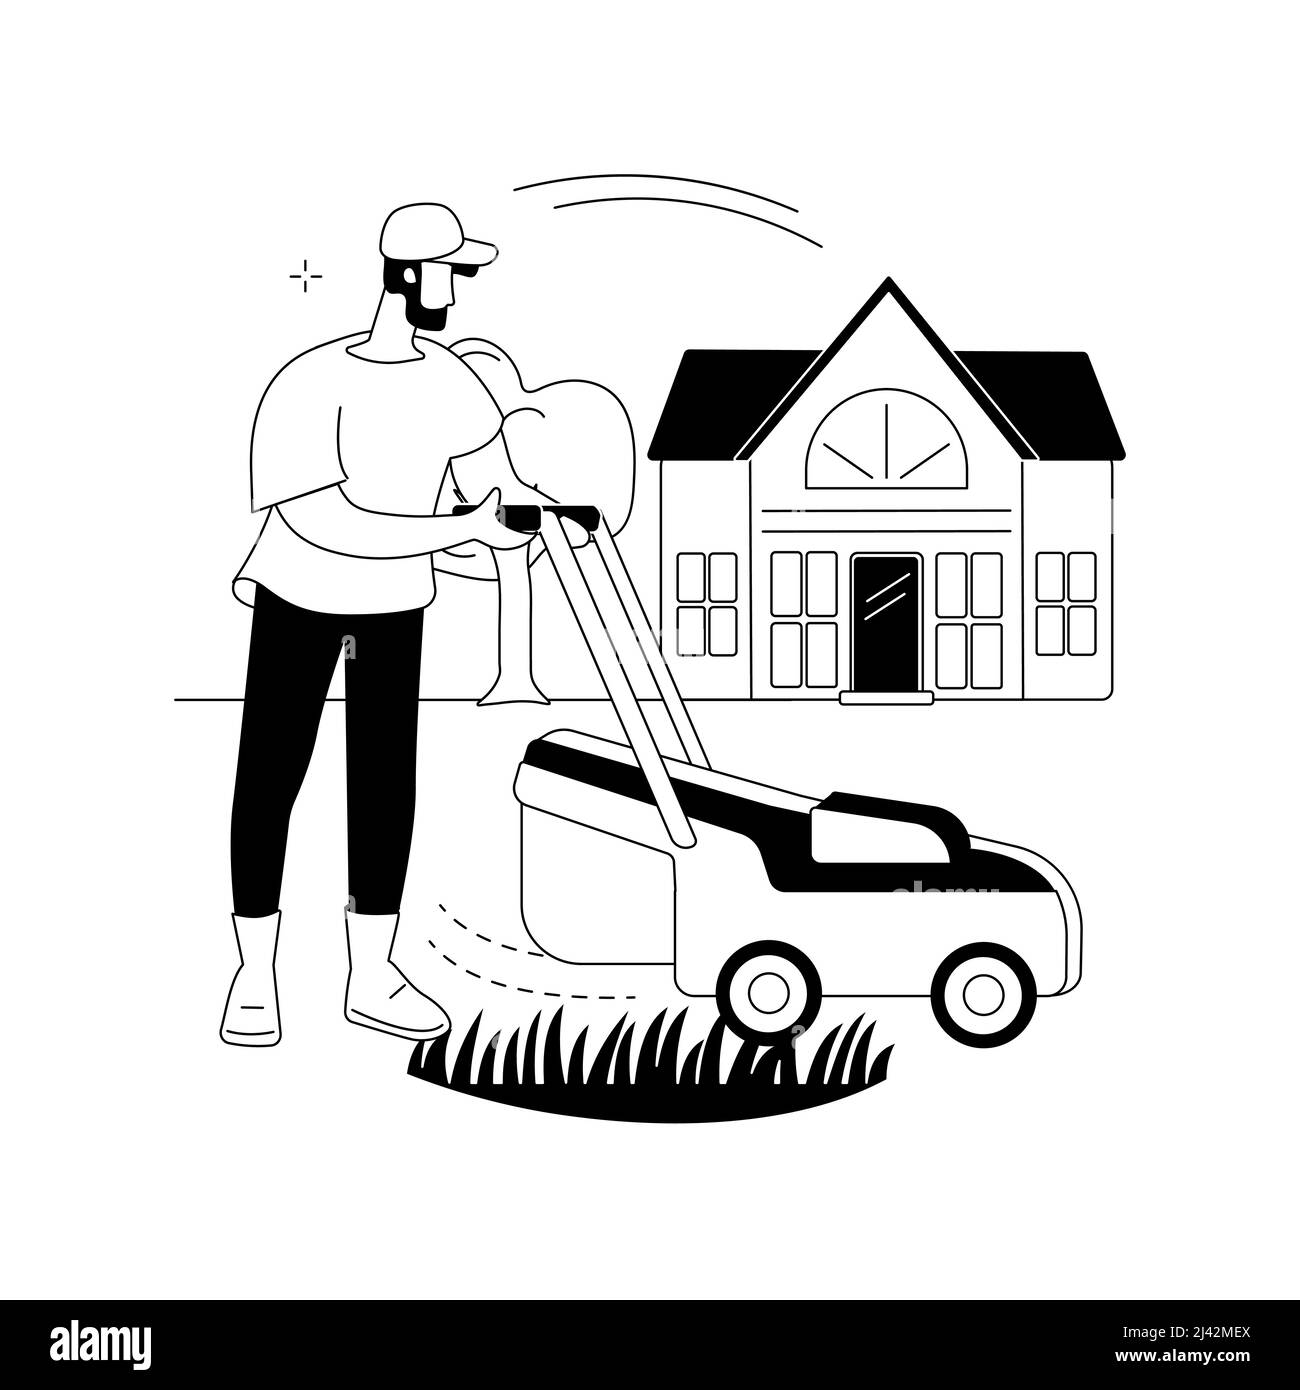 Lawn mowing service abstract concept vector illustration. Grass cutting and clean up, aeration and fertilizing, lawn weeding, gardening services, dand Stock Vector